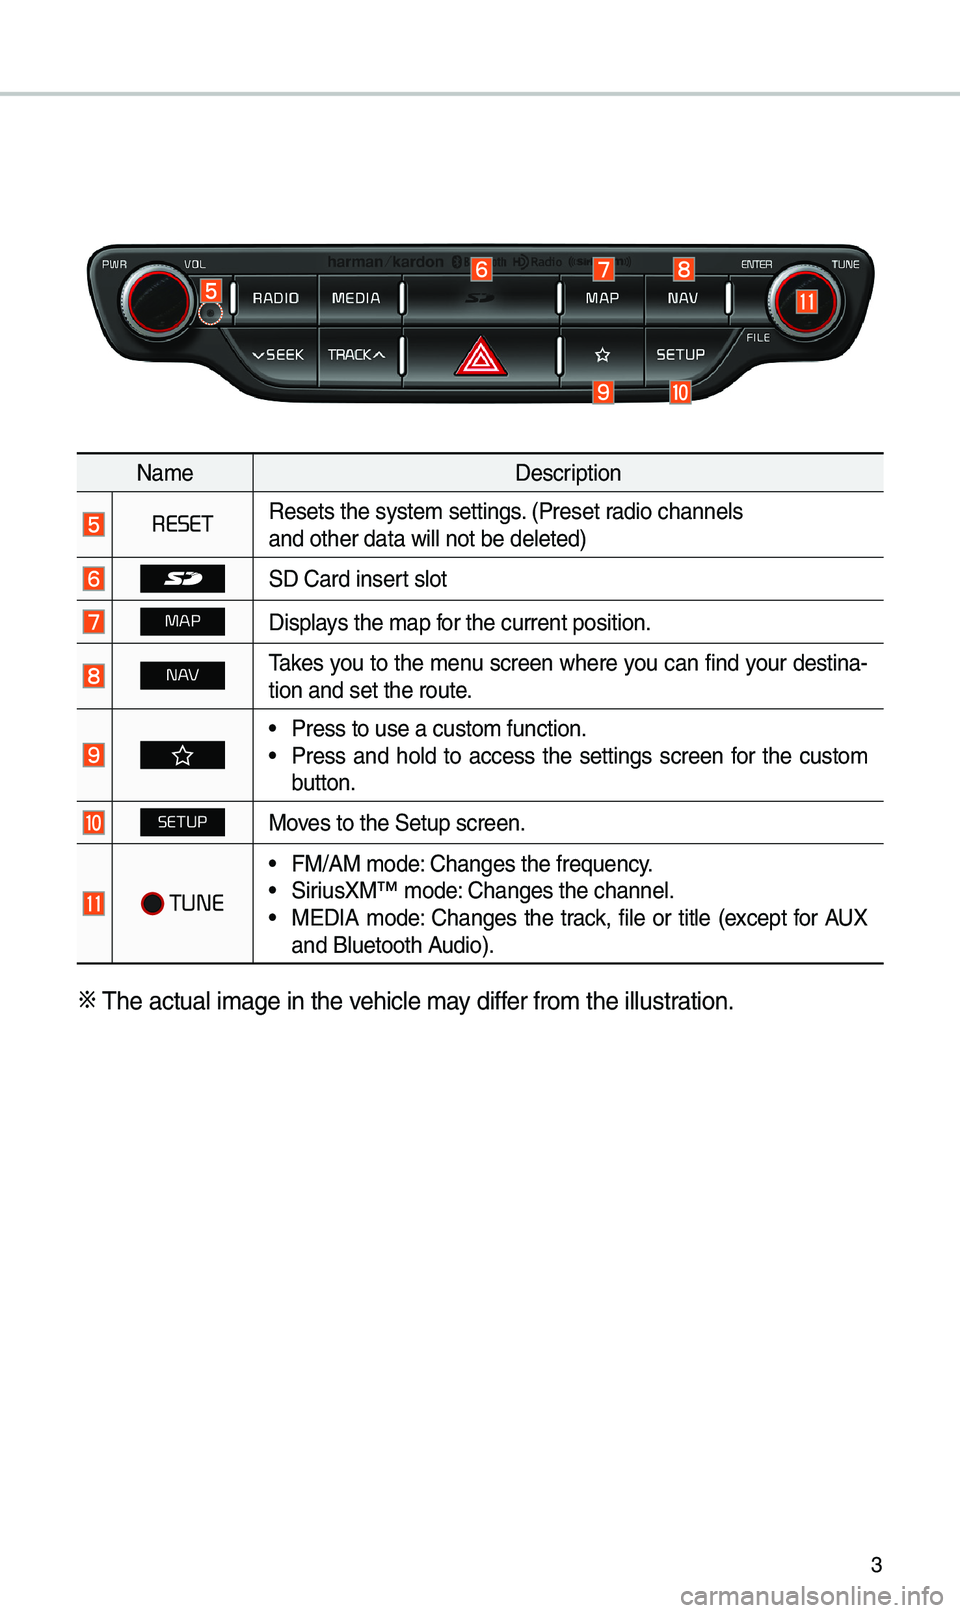 KIA NIRO 2019  Navigation System Quick Reference Guide 3
Nam\fD\fscription
RESETR\fs\fts th\f syst\fm s\ftt\Sings. (Pr\fs\ft radio chann\fls
and oth\fr data will\S not b\f d\fl\ft\fd)
SD Card ins\frt slot
MAPDisplays th\f map for th\f curr\fnt posit\Sion.